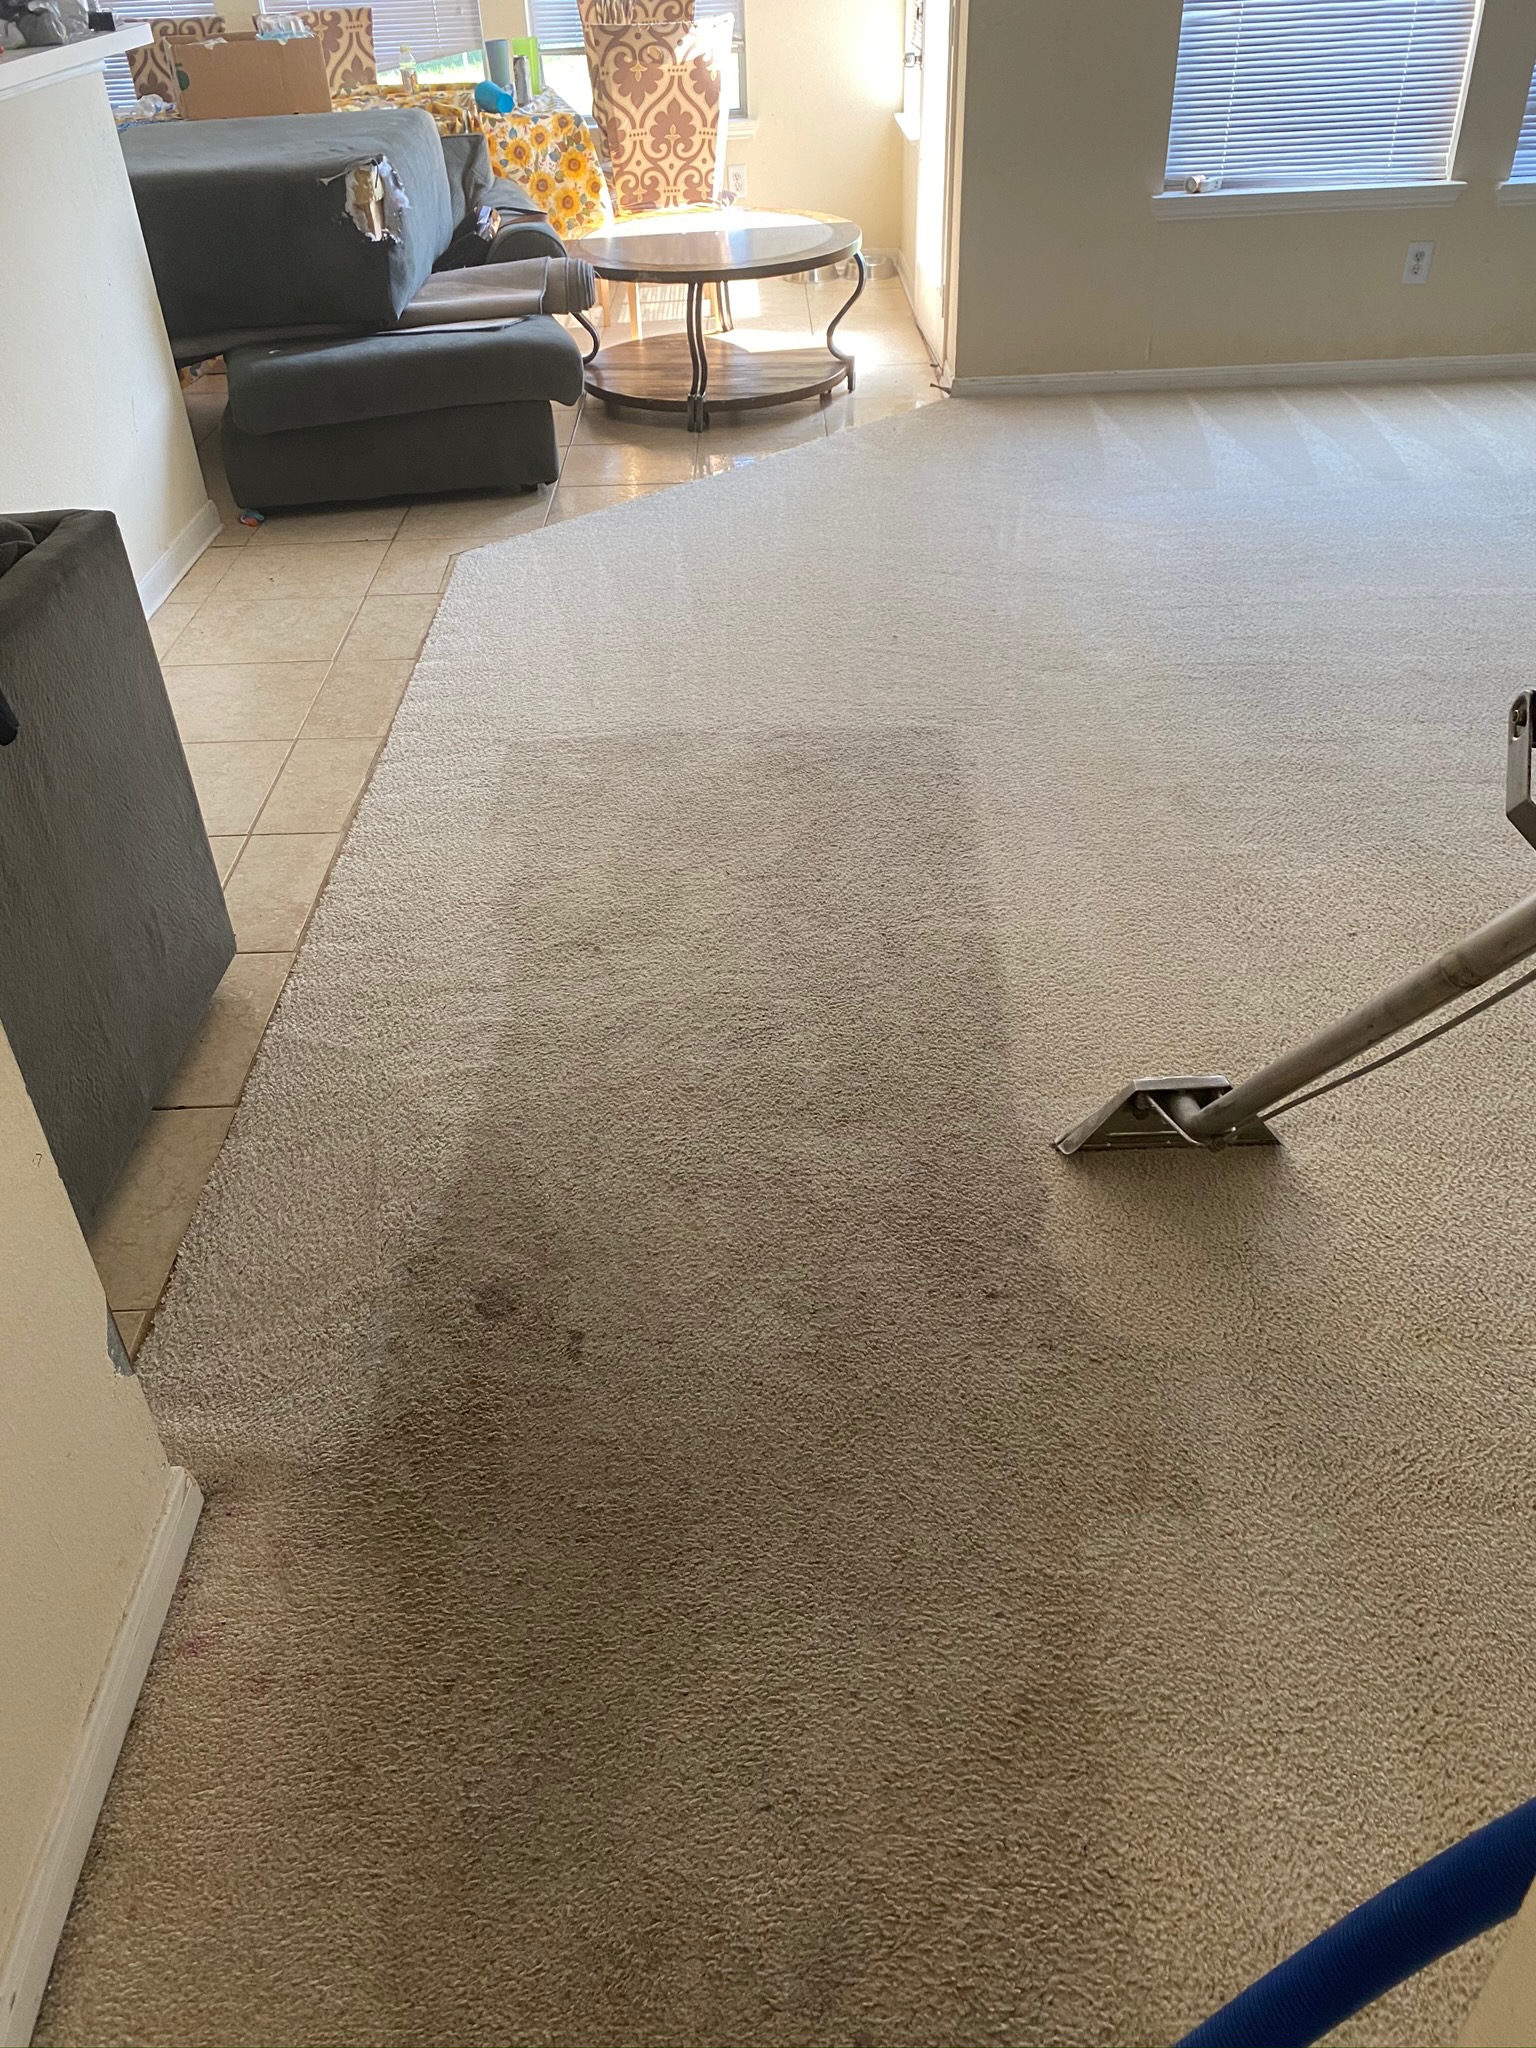 texas professional carpet cleaning